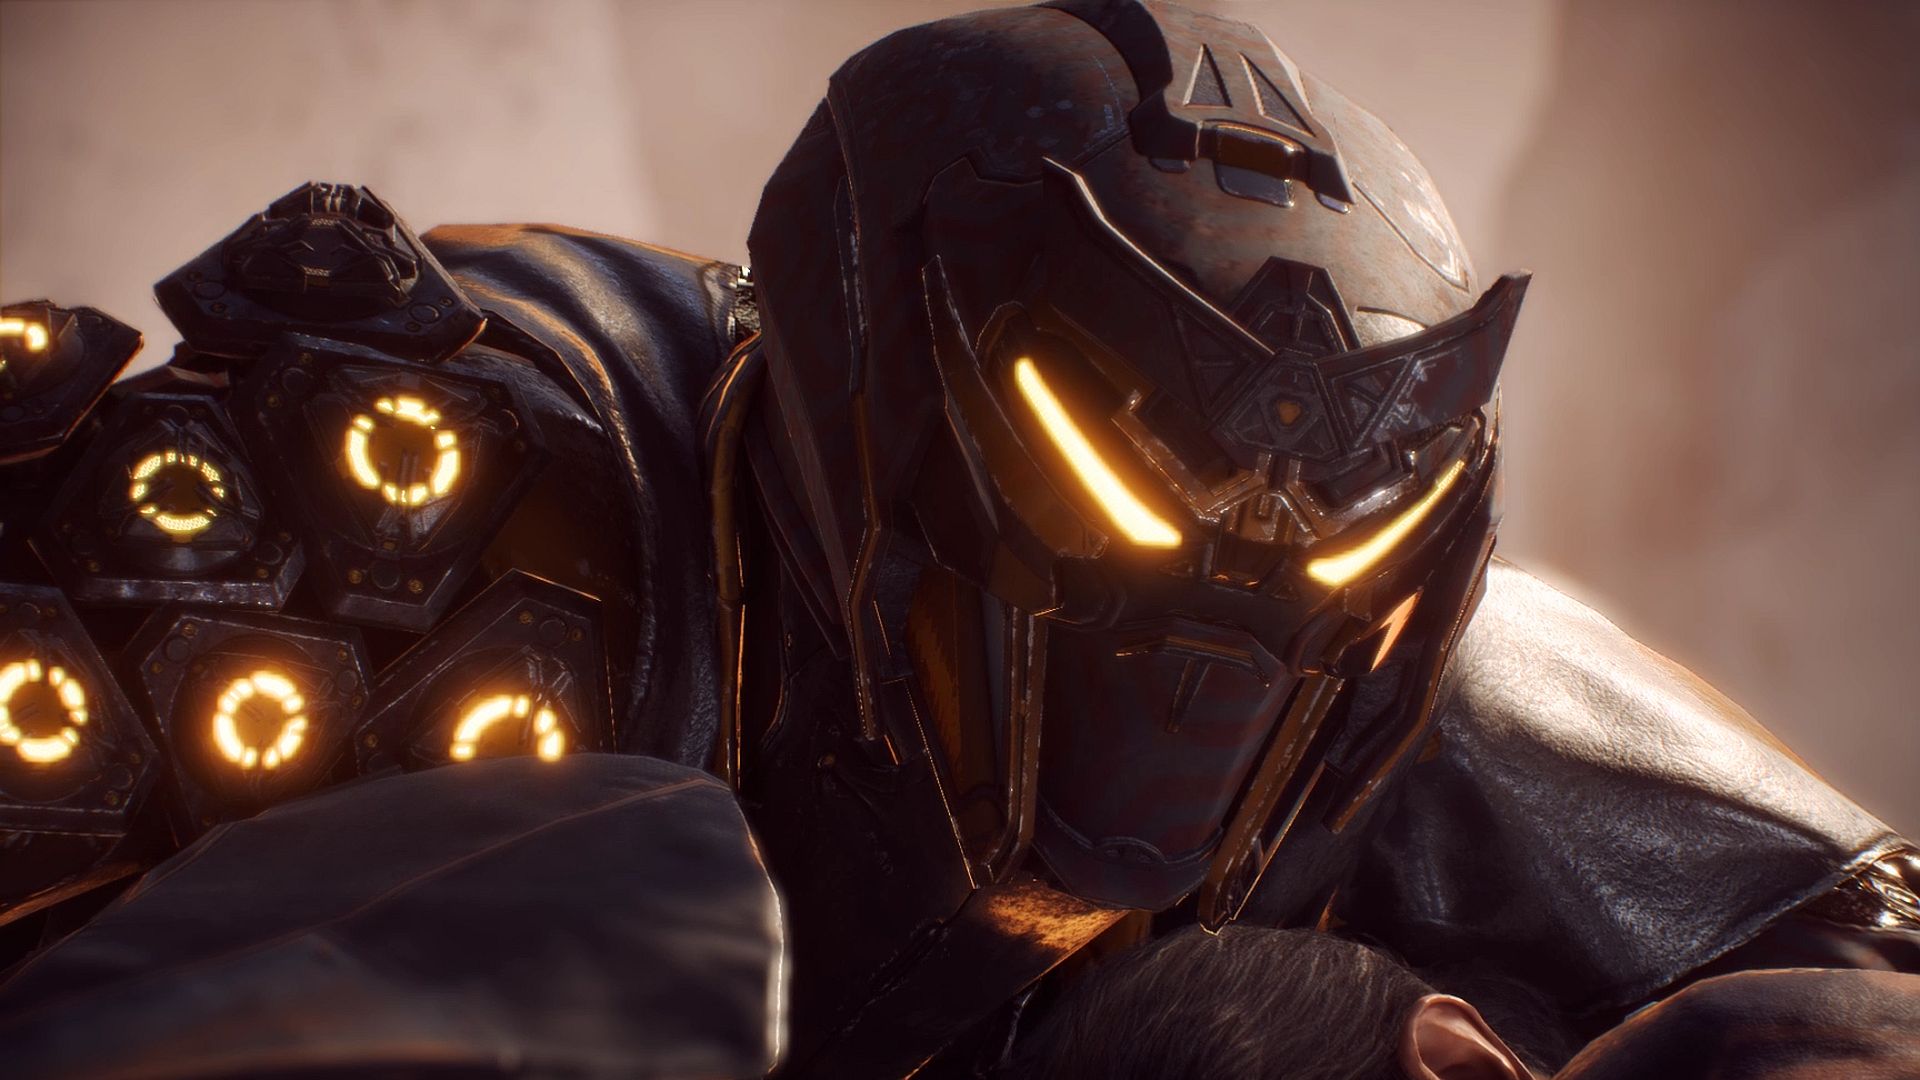 Anthem is BioWare’s bestselling launch after Mass Effect 3 ... - 1920 x 1080 jpeg 194kB